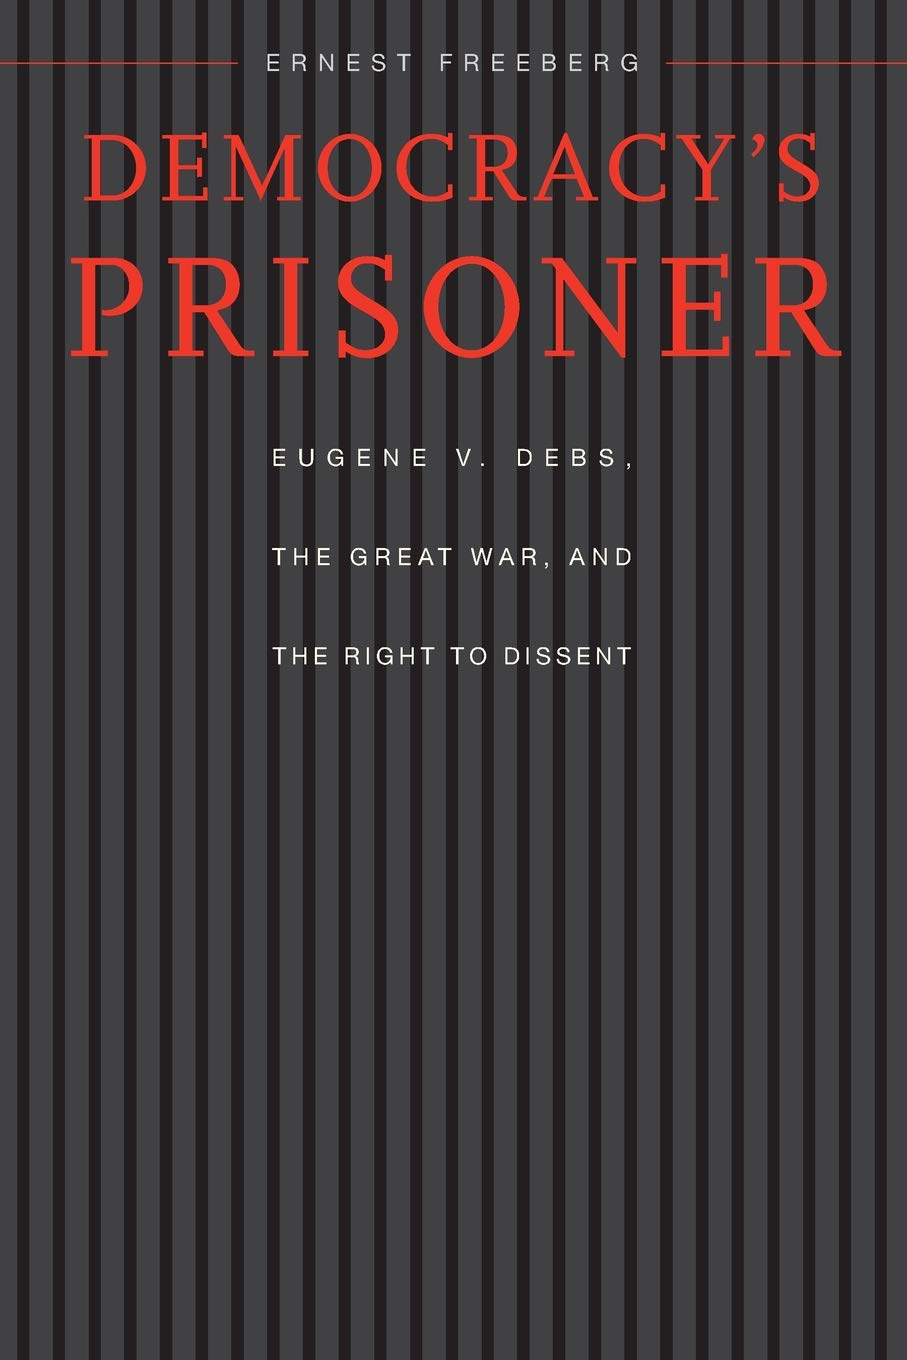 Democracy’s Prisoner: Eugene V. Debs, the Great War, and the Right to Dissent